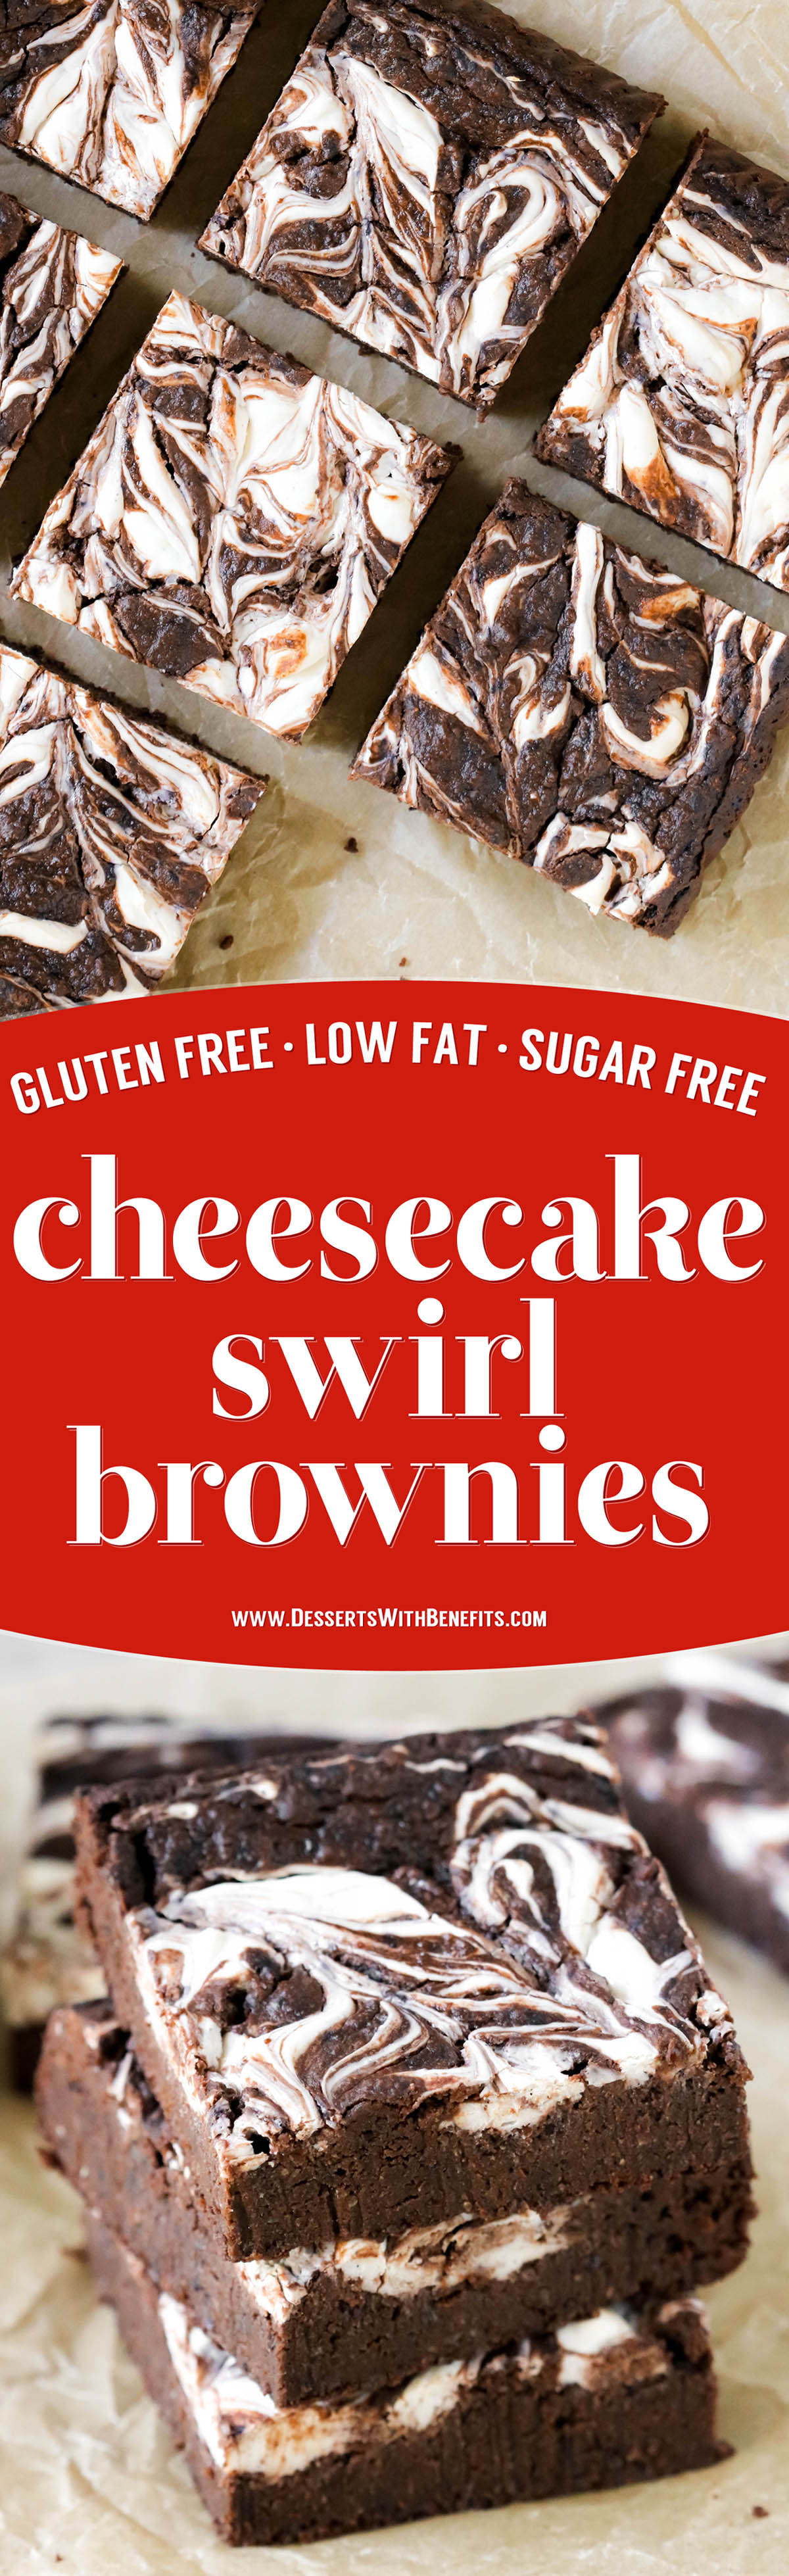 These Cheesecake Swirl Brownies are fudgy, dense, and chocolatey. And they're gluten free, sugar free, high fiber, and high protein too!